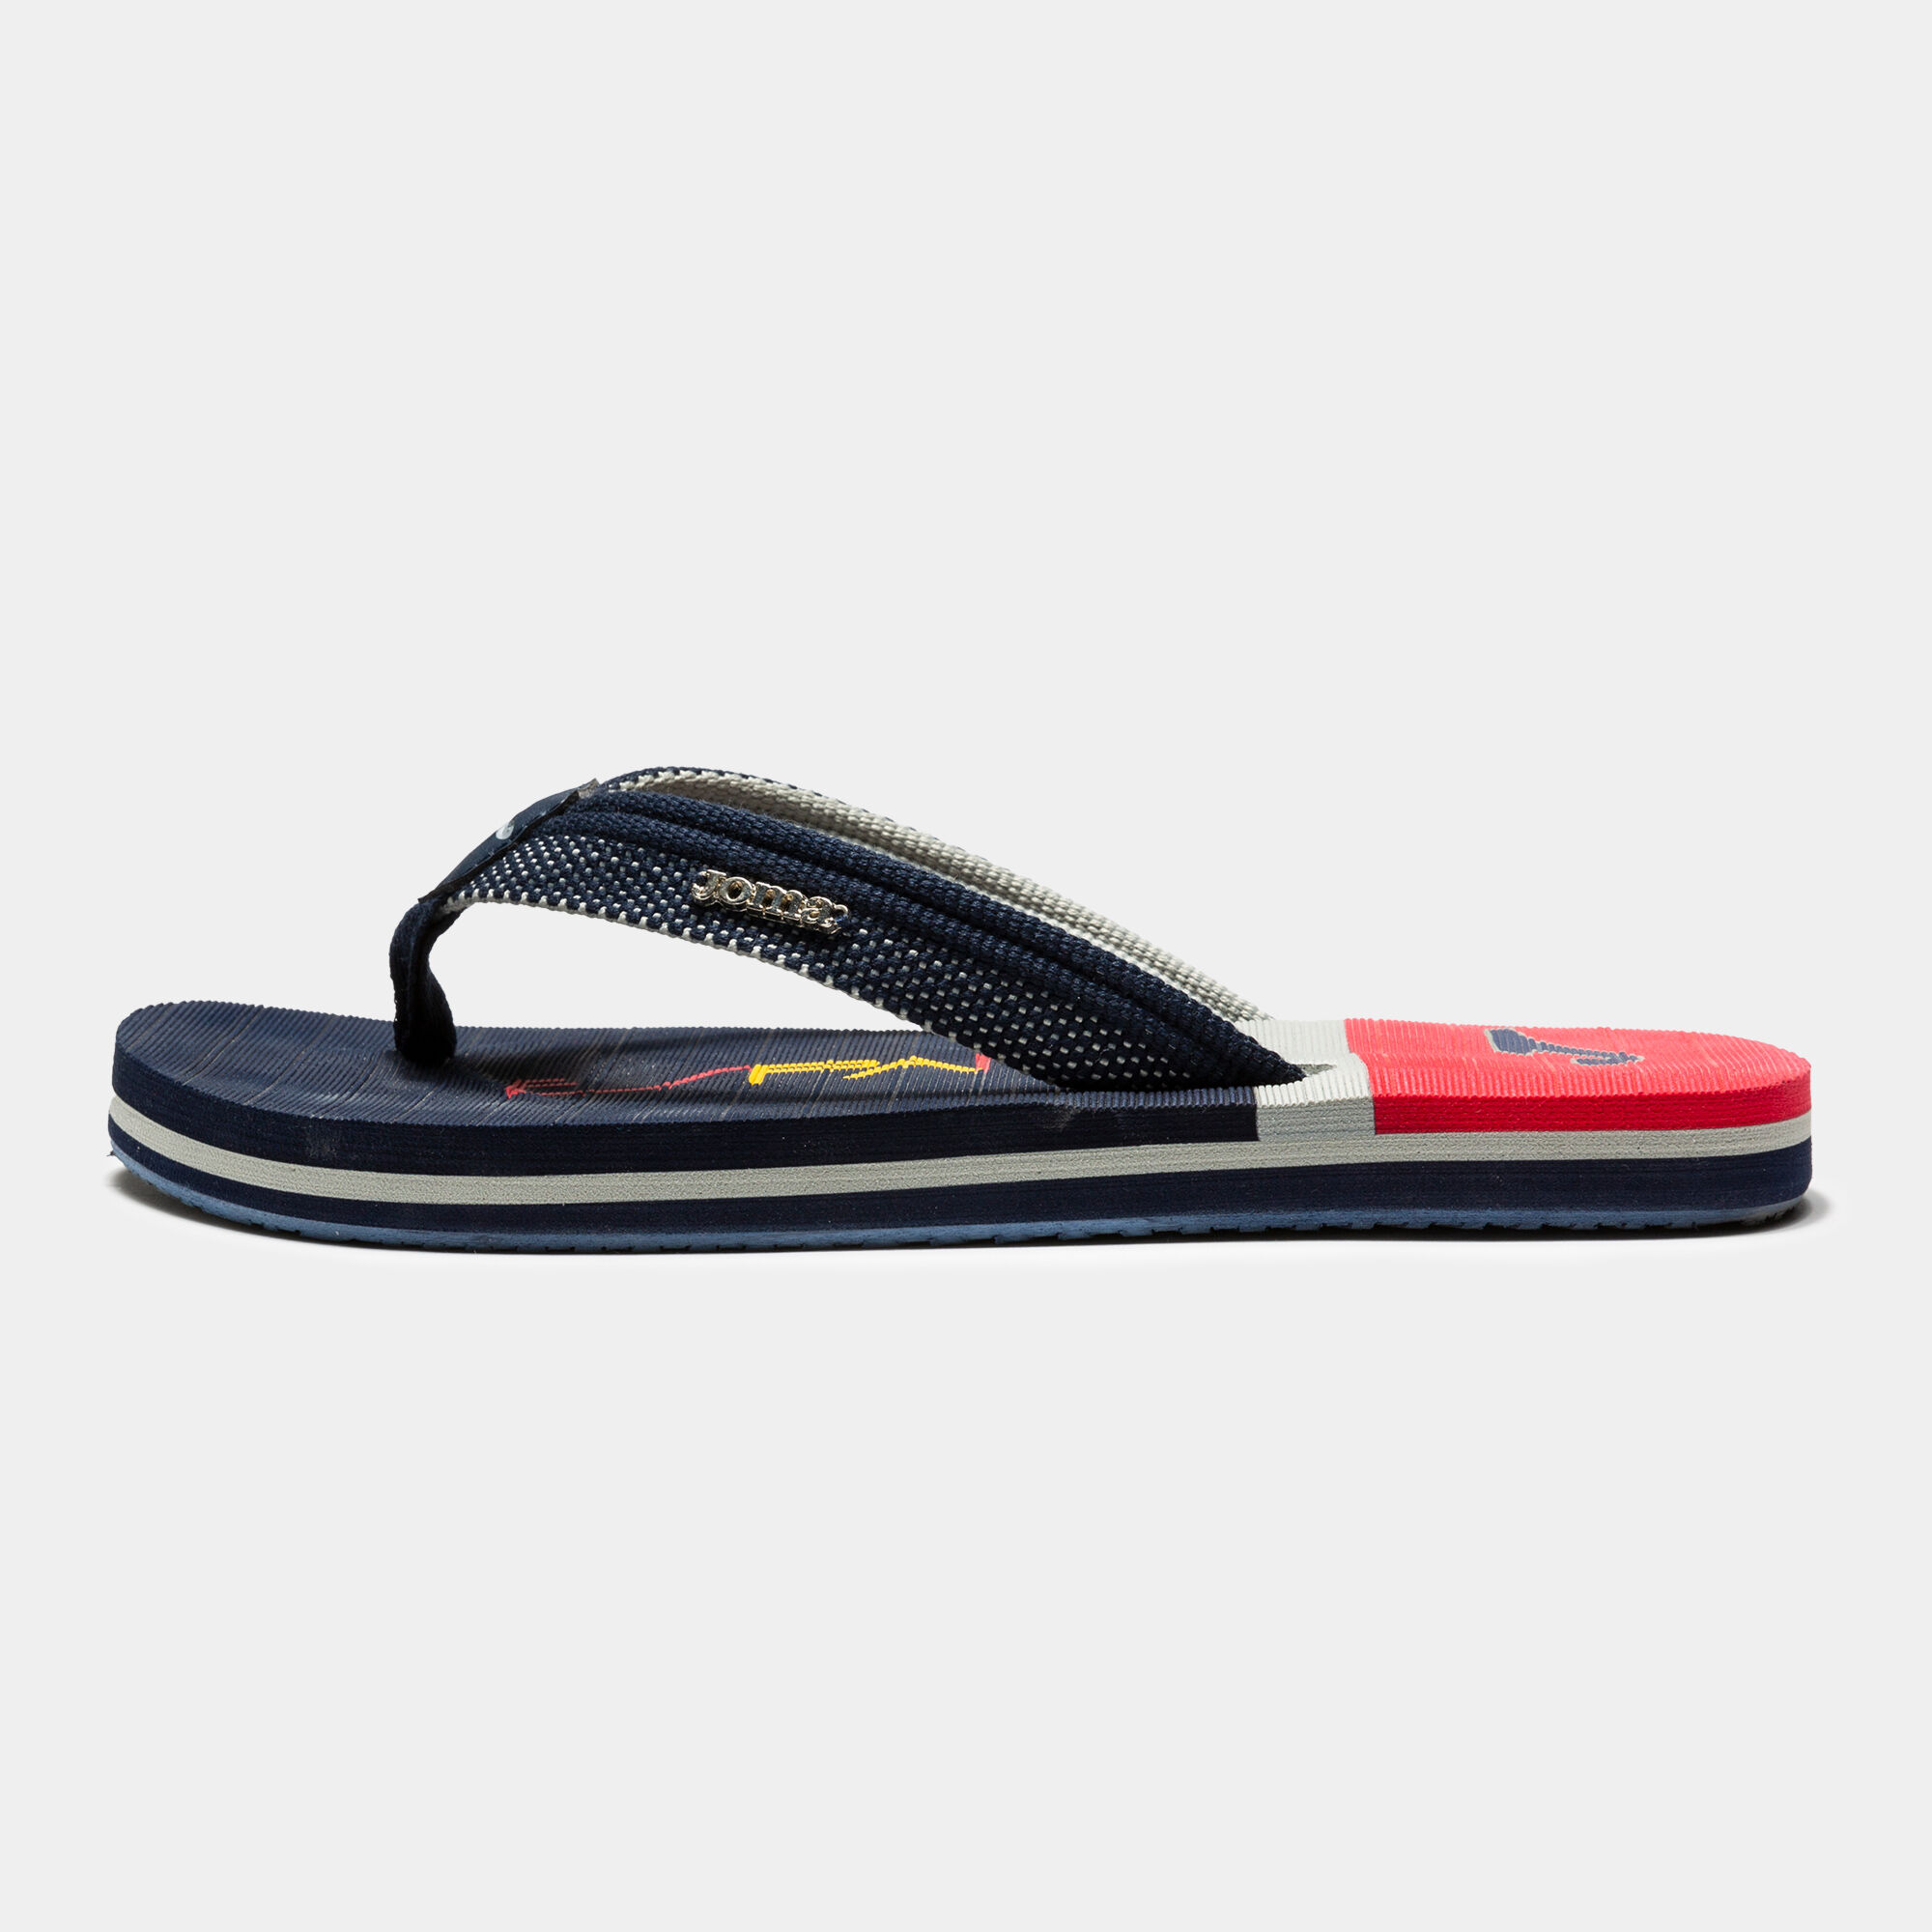 CASUAL FLIP-FLOPS PLAYA SPANISH OLYMPIC COMMITTEE WOMAN NAVY BLUE RED